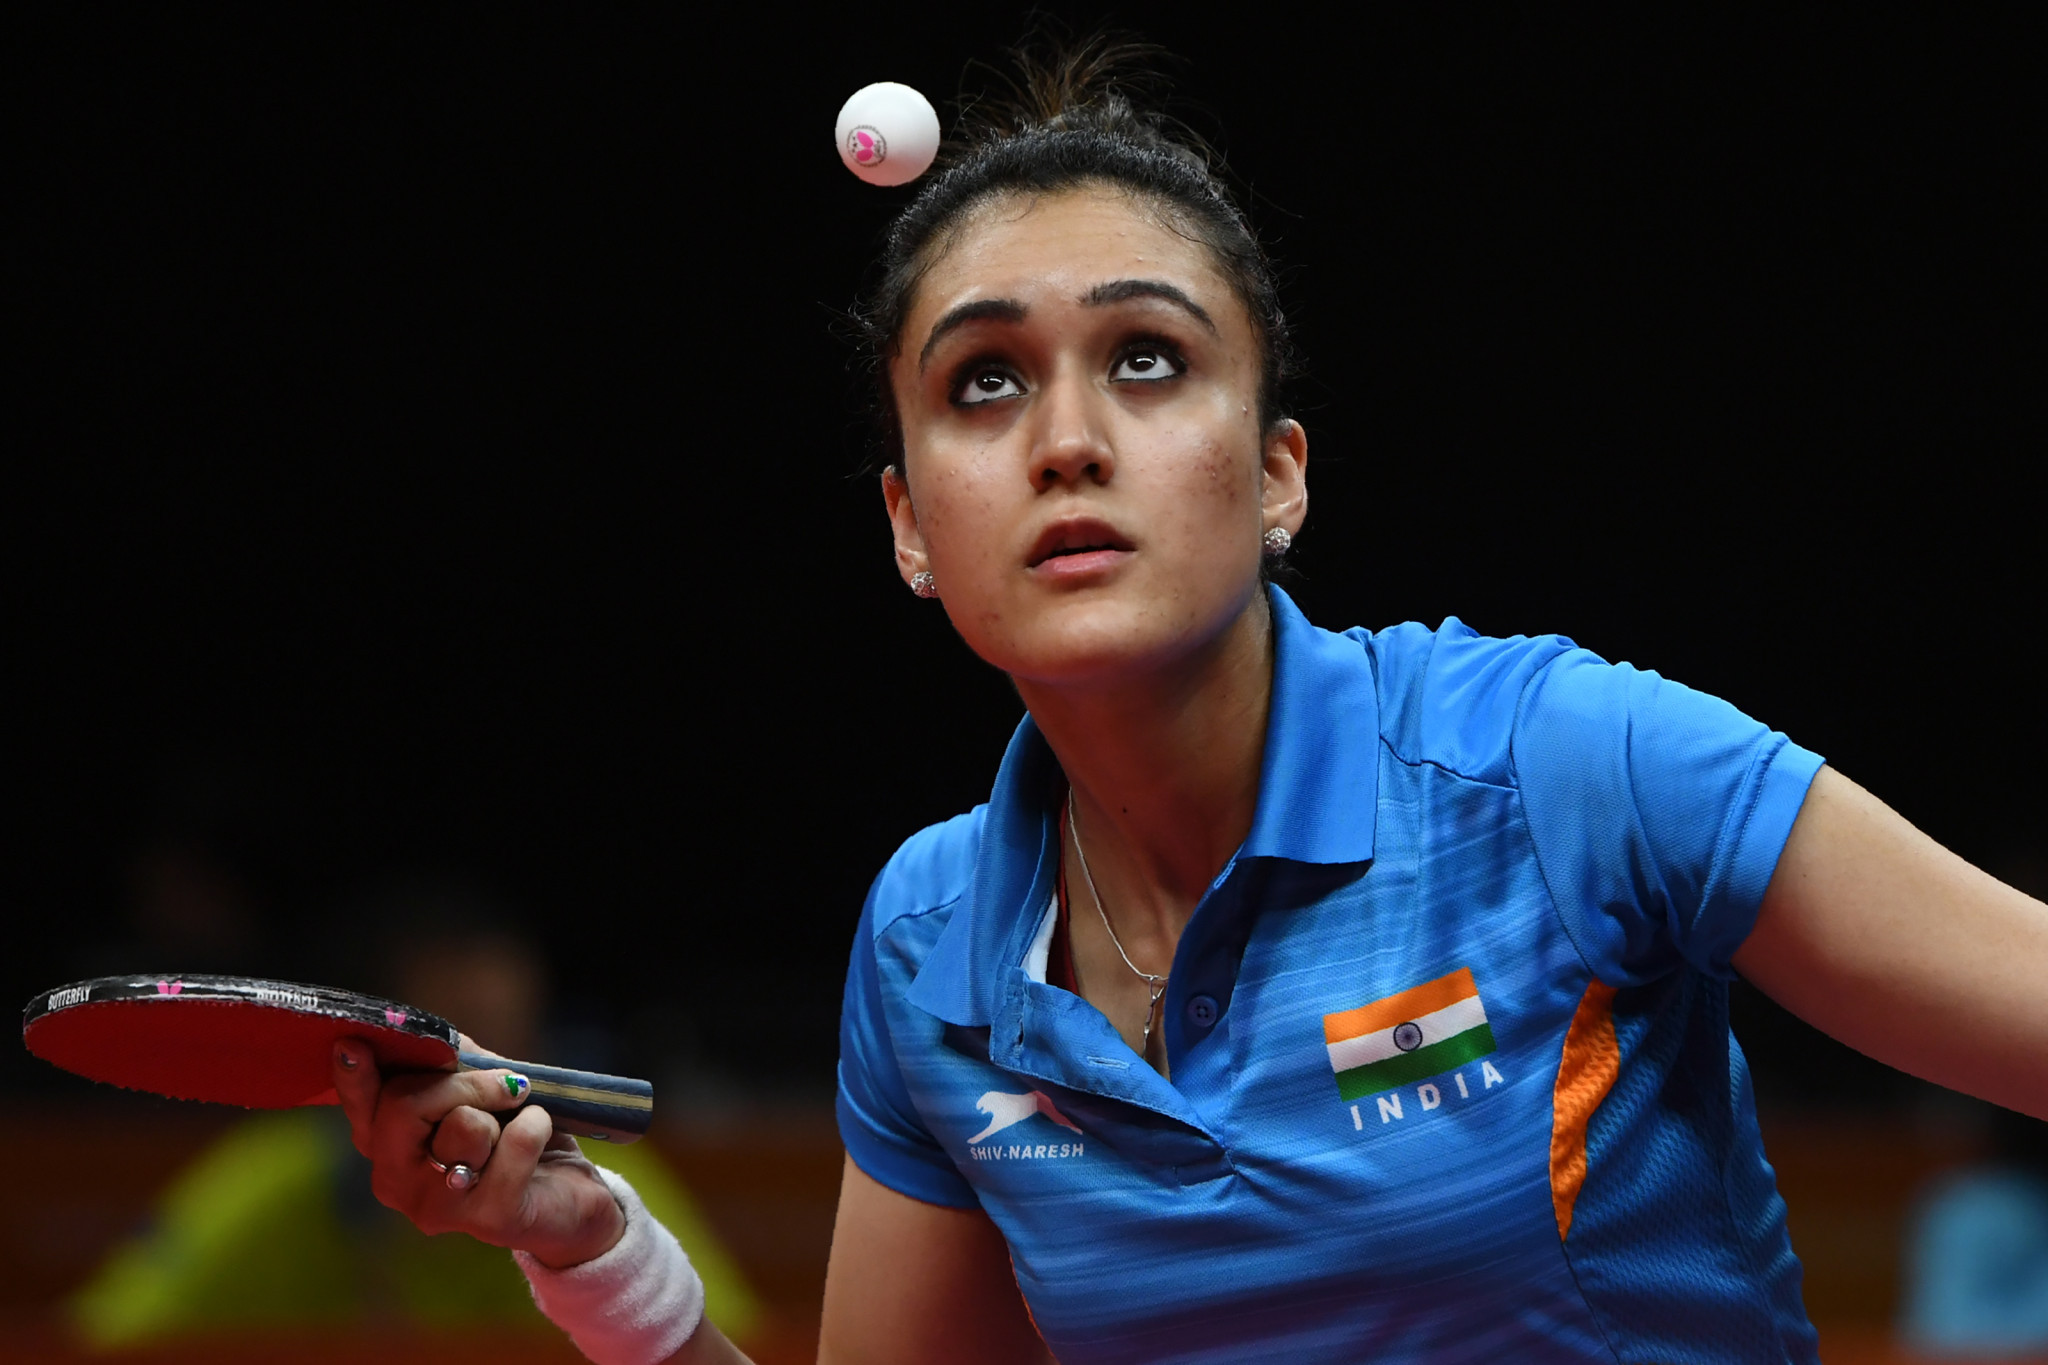 Commonwealth Games table tennis gold medallist Manika Batra was among the female athletes specially picked out for praise by Indian Prime Minister Narendra Modi ©Getty Images